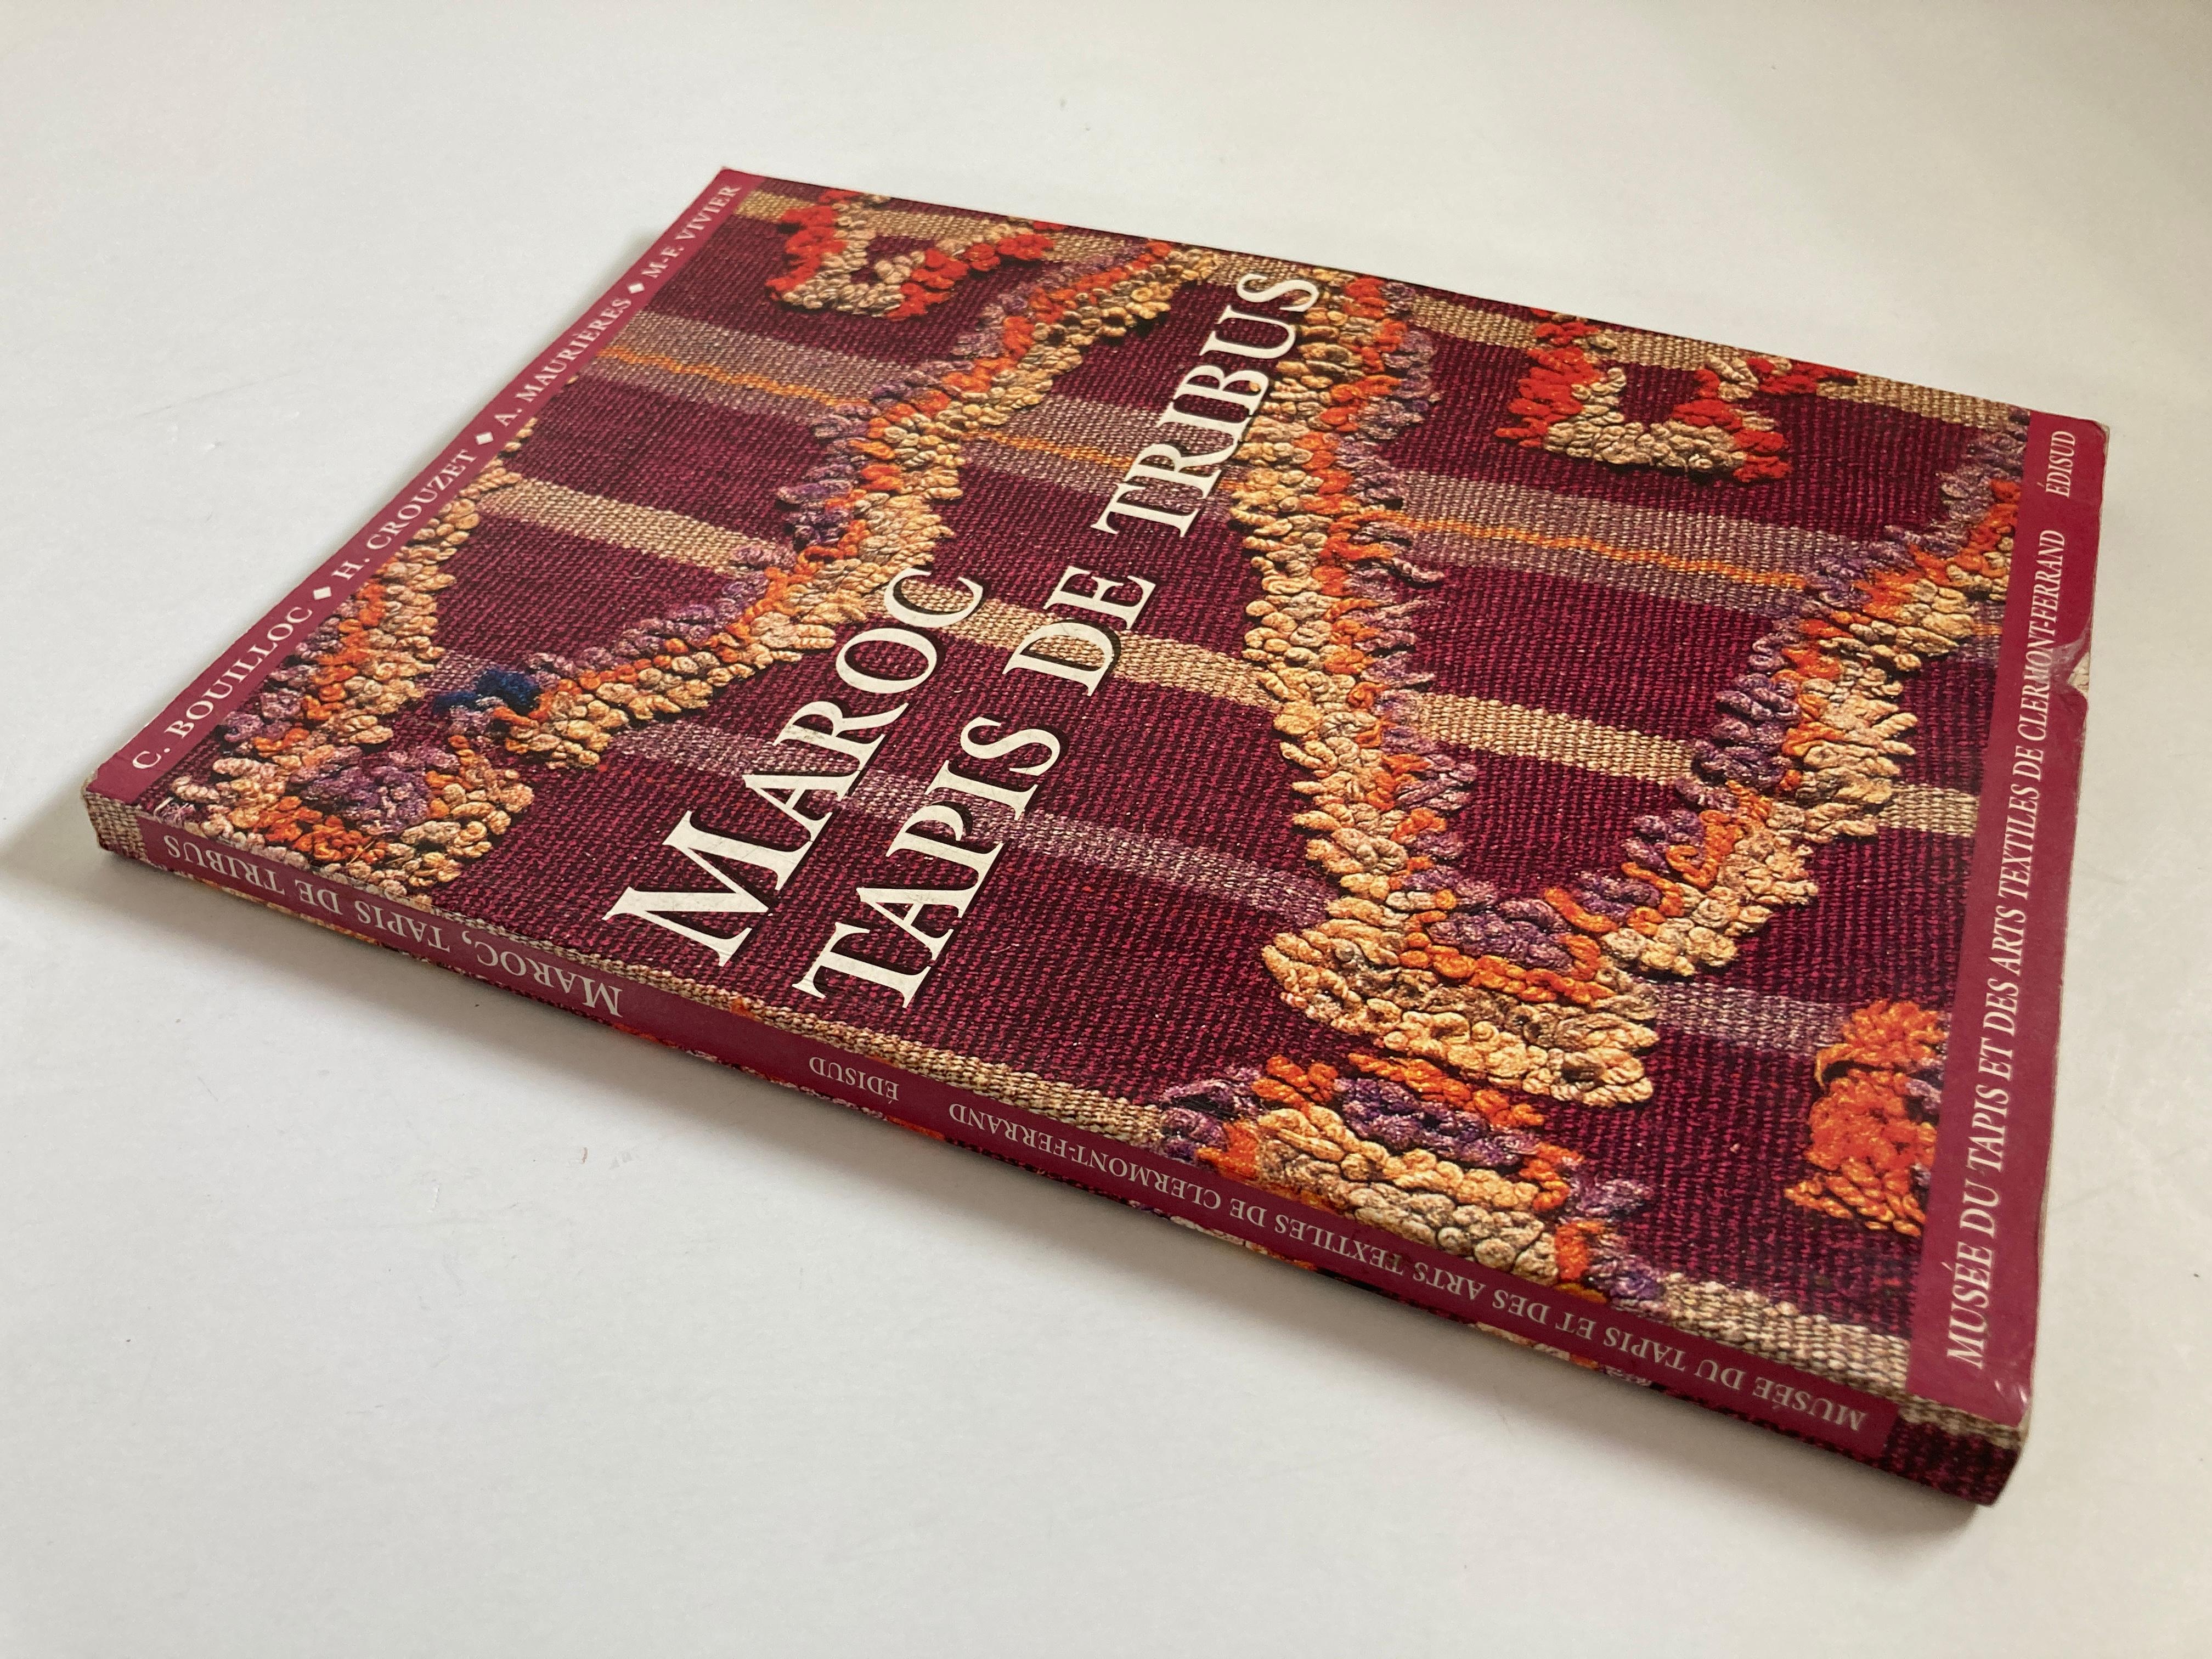 Maroc. Tapis de tribus (French) Paperback 
Moroccan Tribal Rugs
Language: French
Maroc Tapis De Tribus
C.BOULLOC / H.CROUZET / A.MAURIERES / M-F VIVIER
Published by Edisud, 2001
173 + 2 pages, illustrated in color plates. 
Photography by Eric